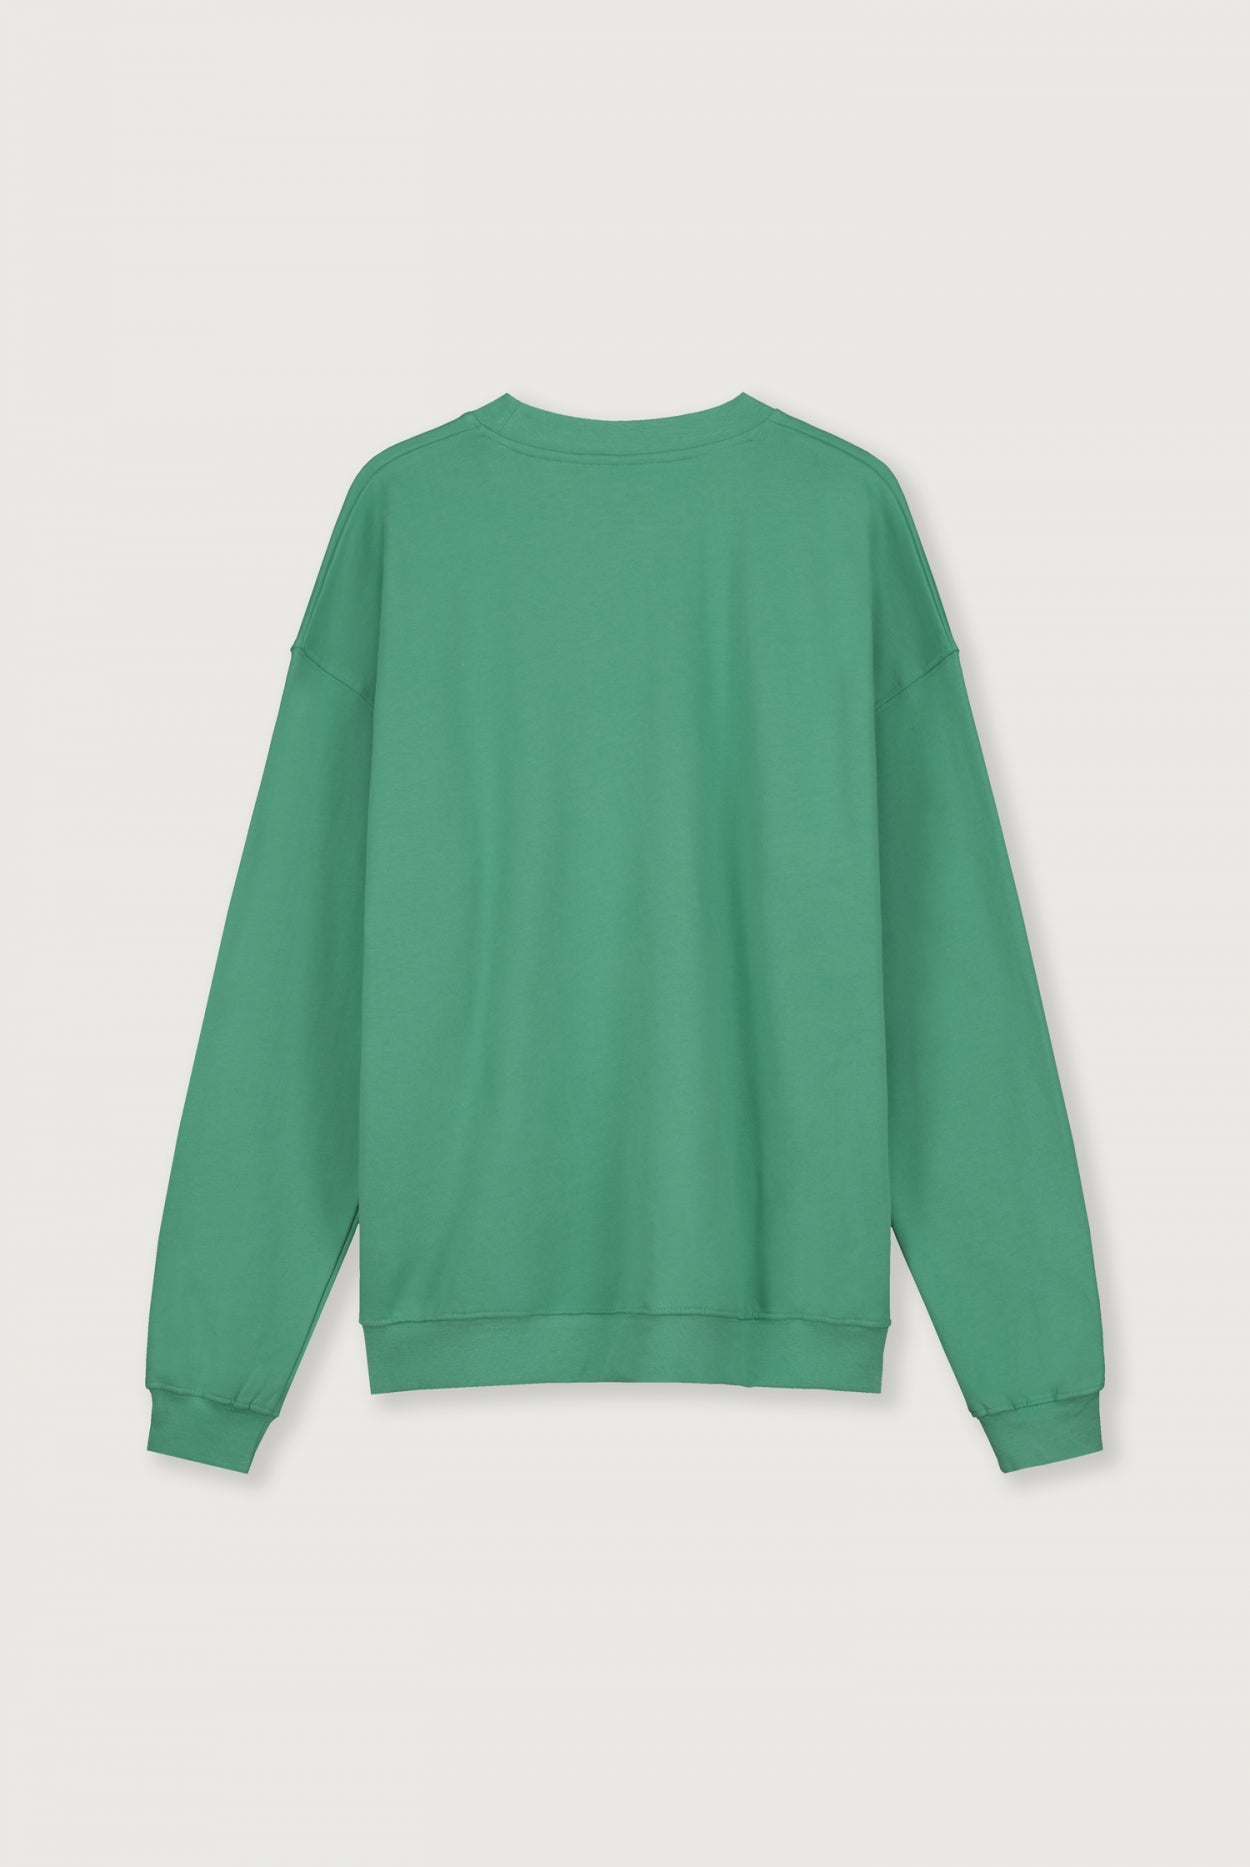 Adult Dropped Shoulder Sweater Bright Green